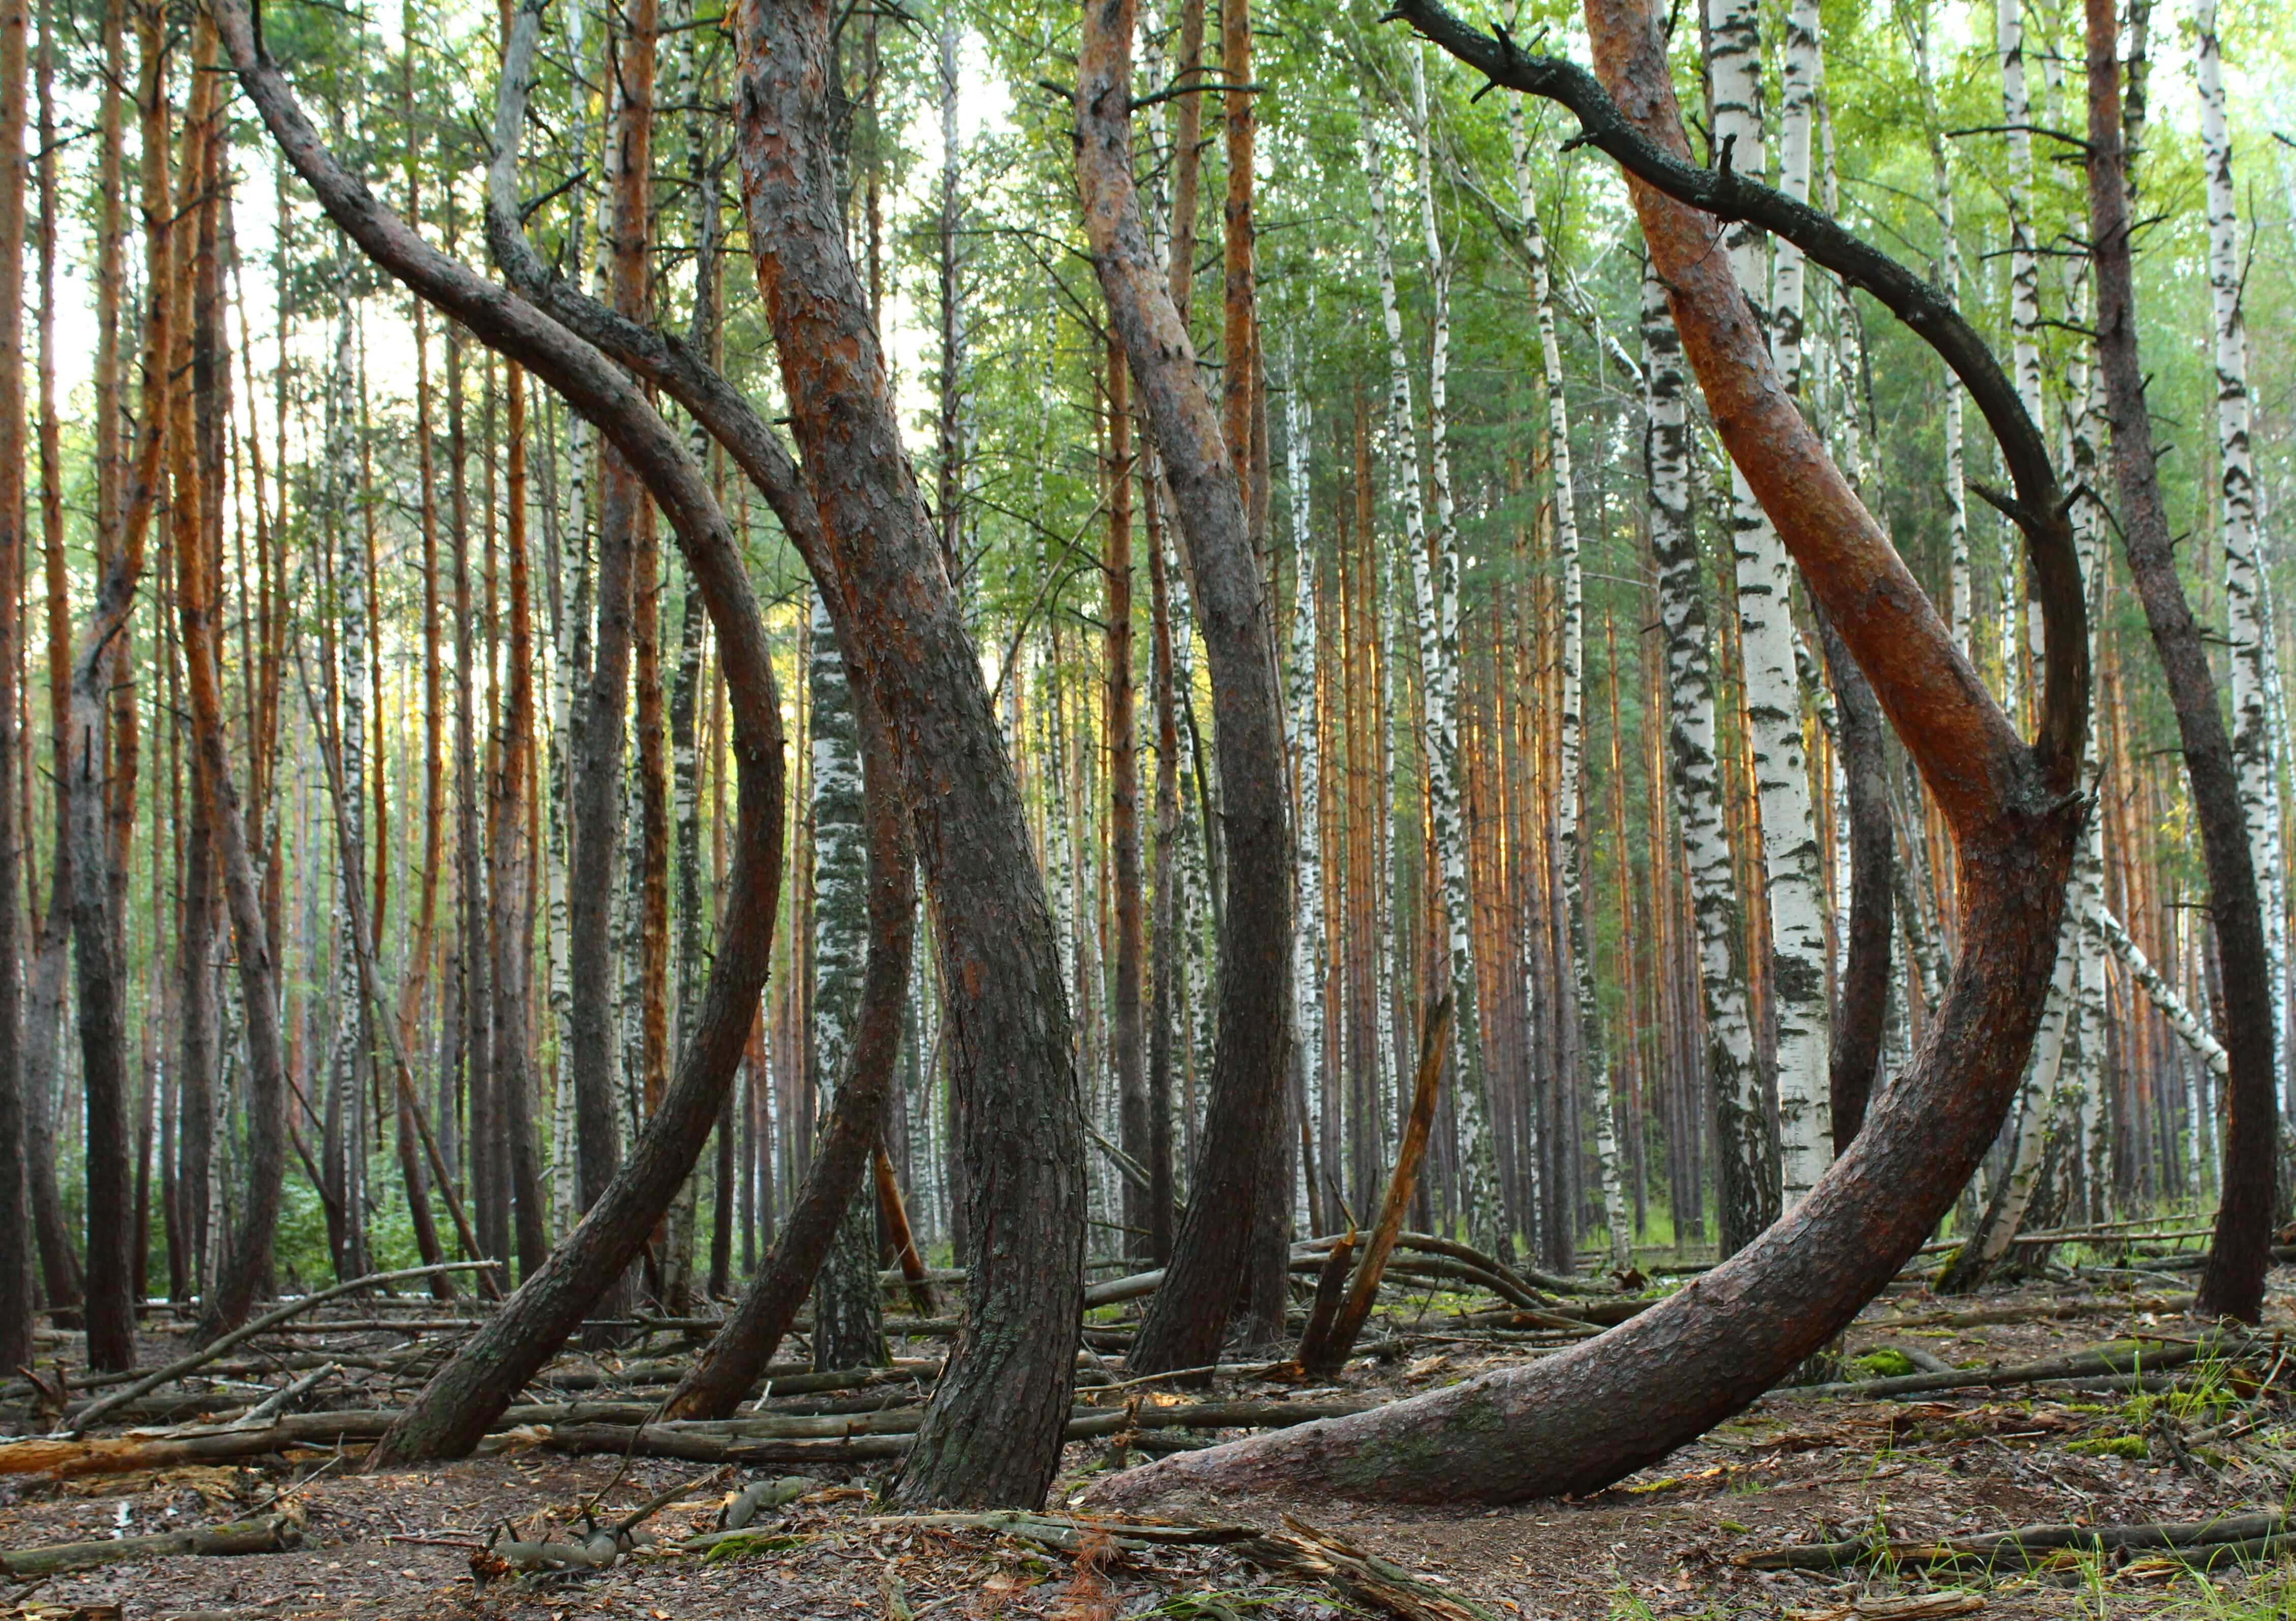 Curved trees